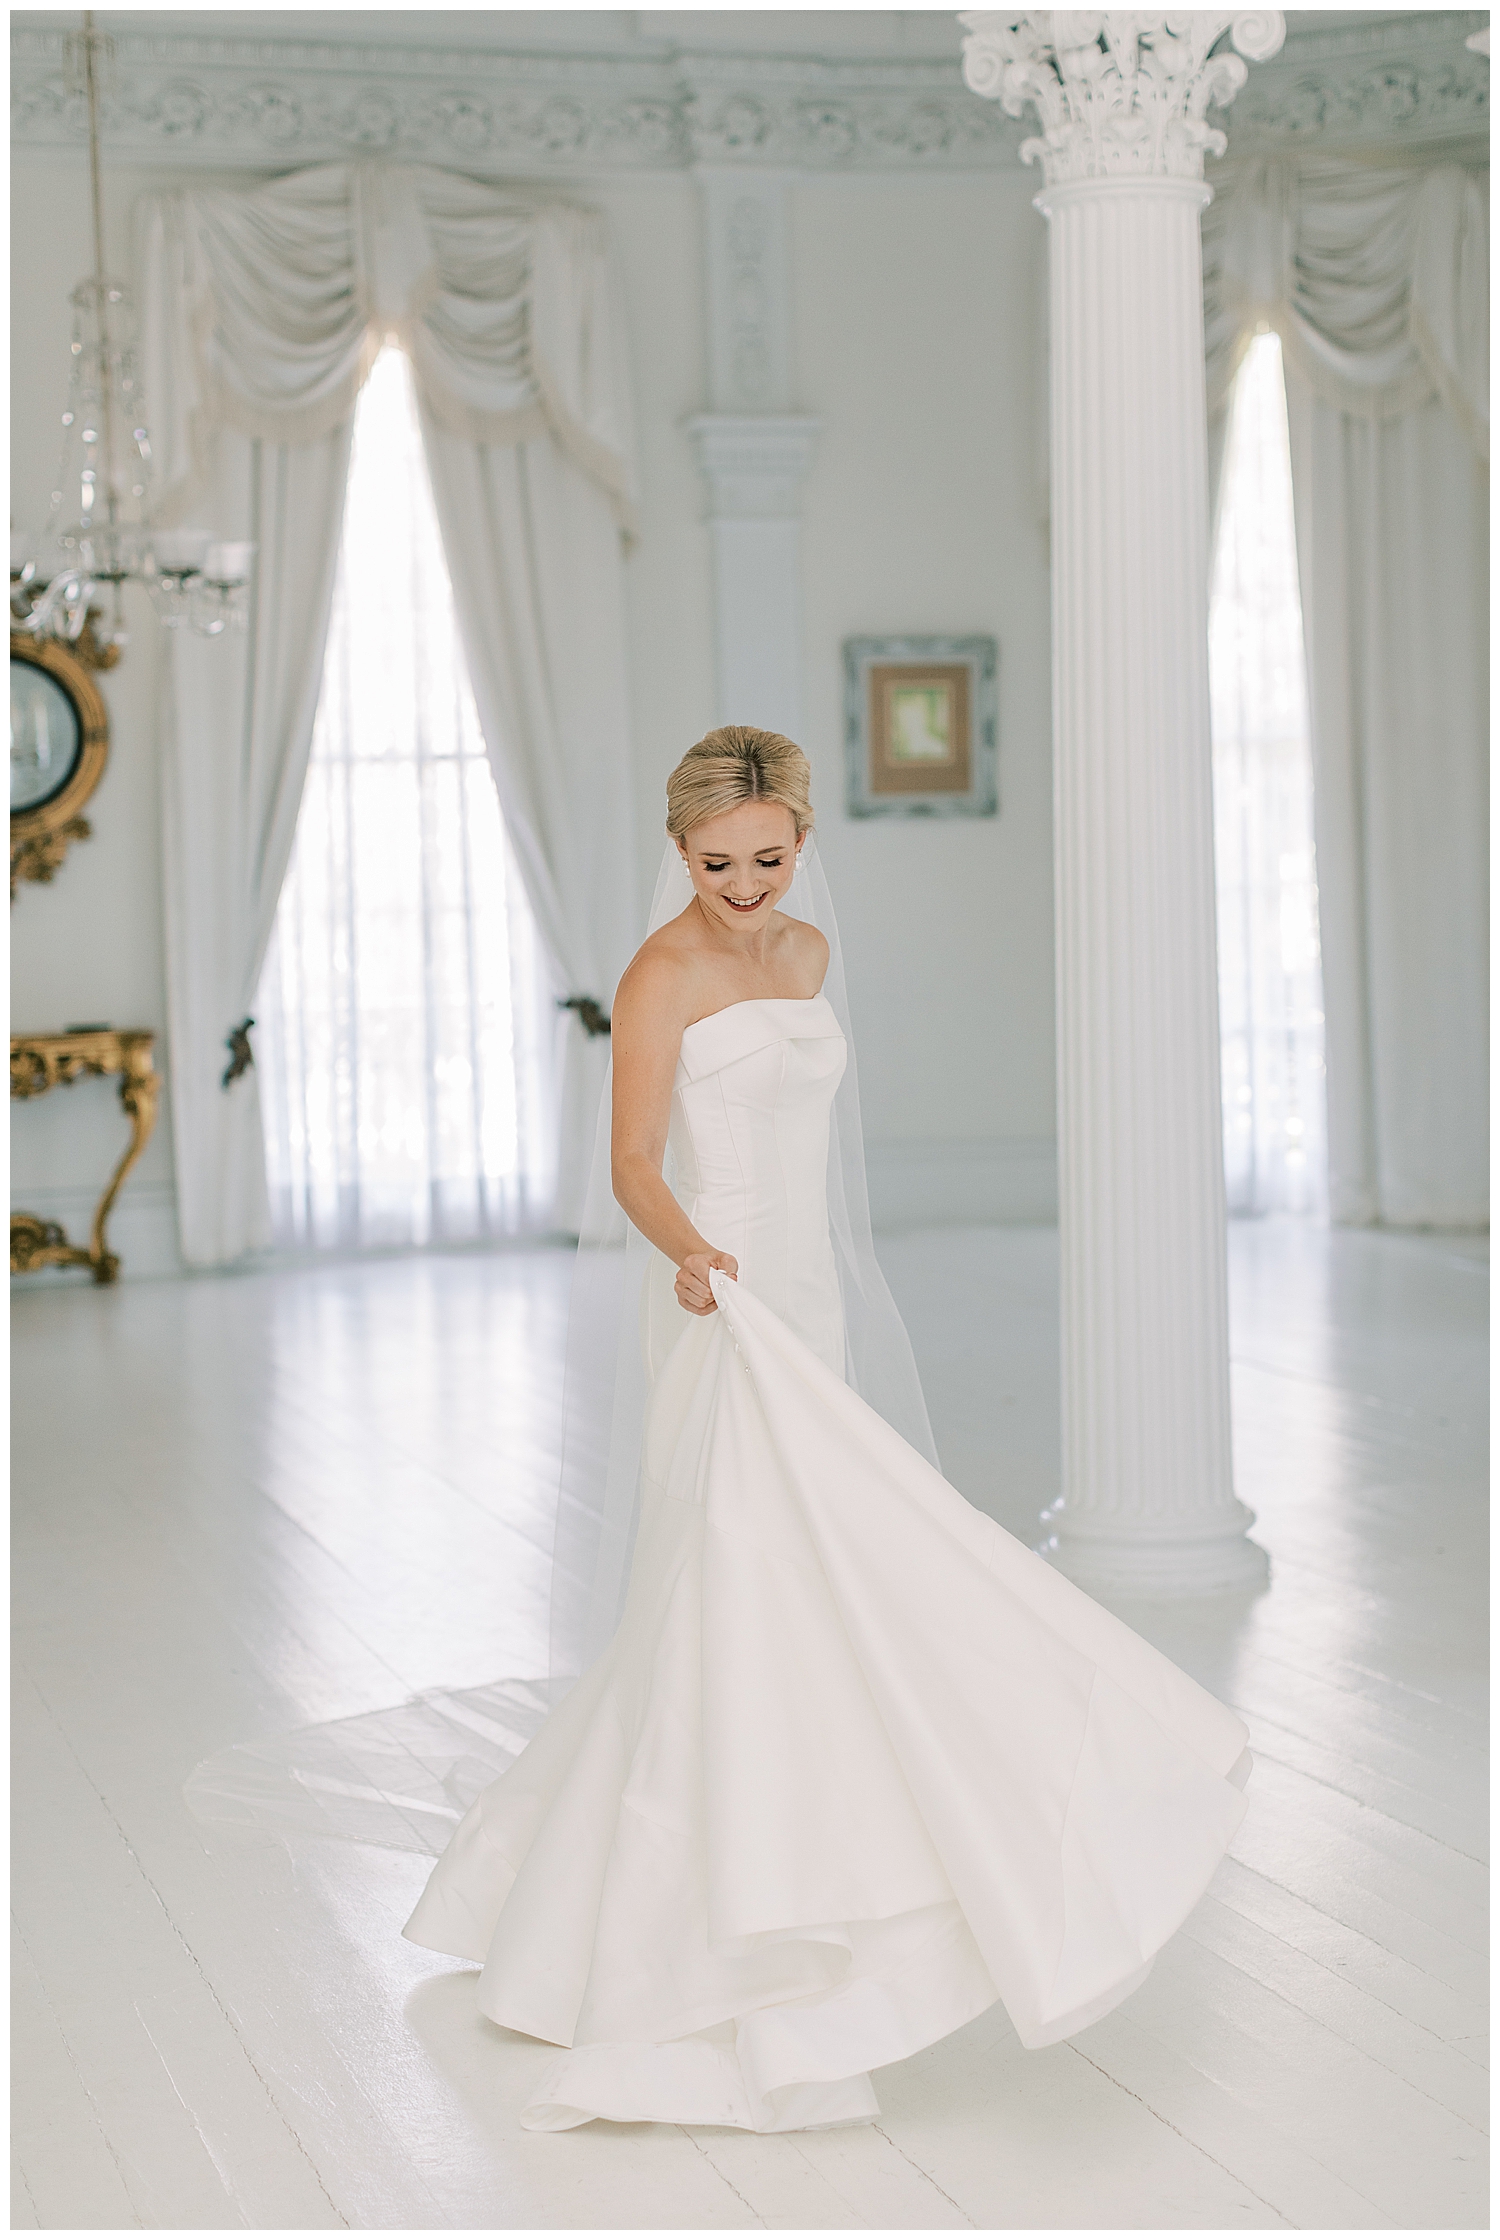 A bride twirls her dress in a white room.